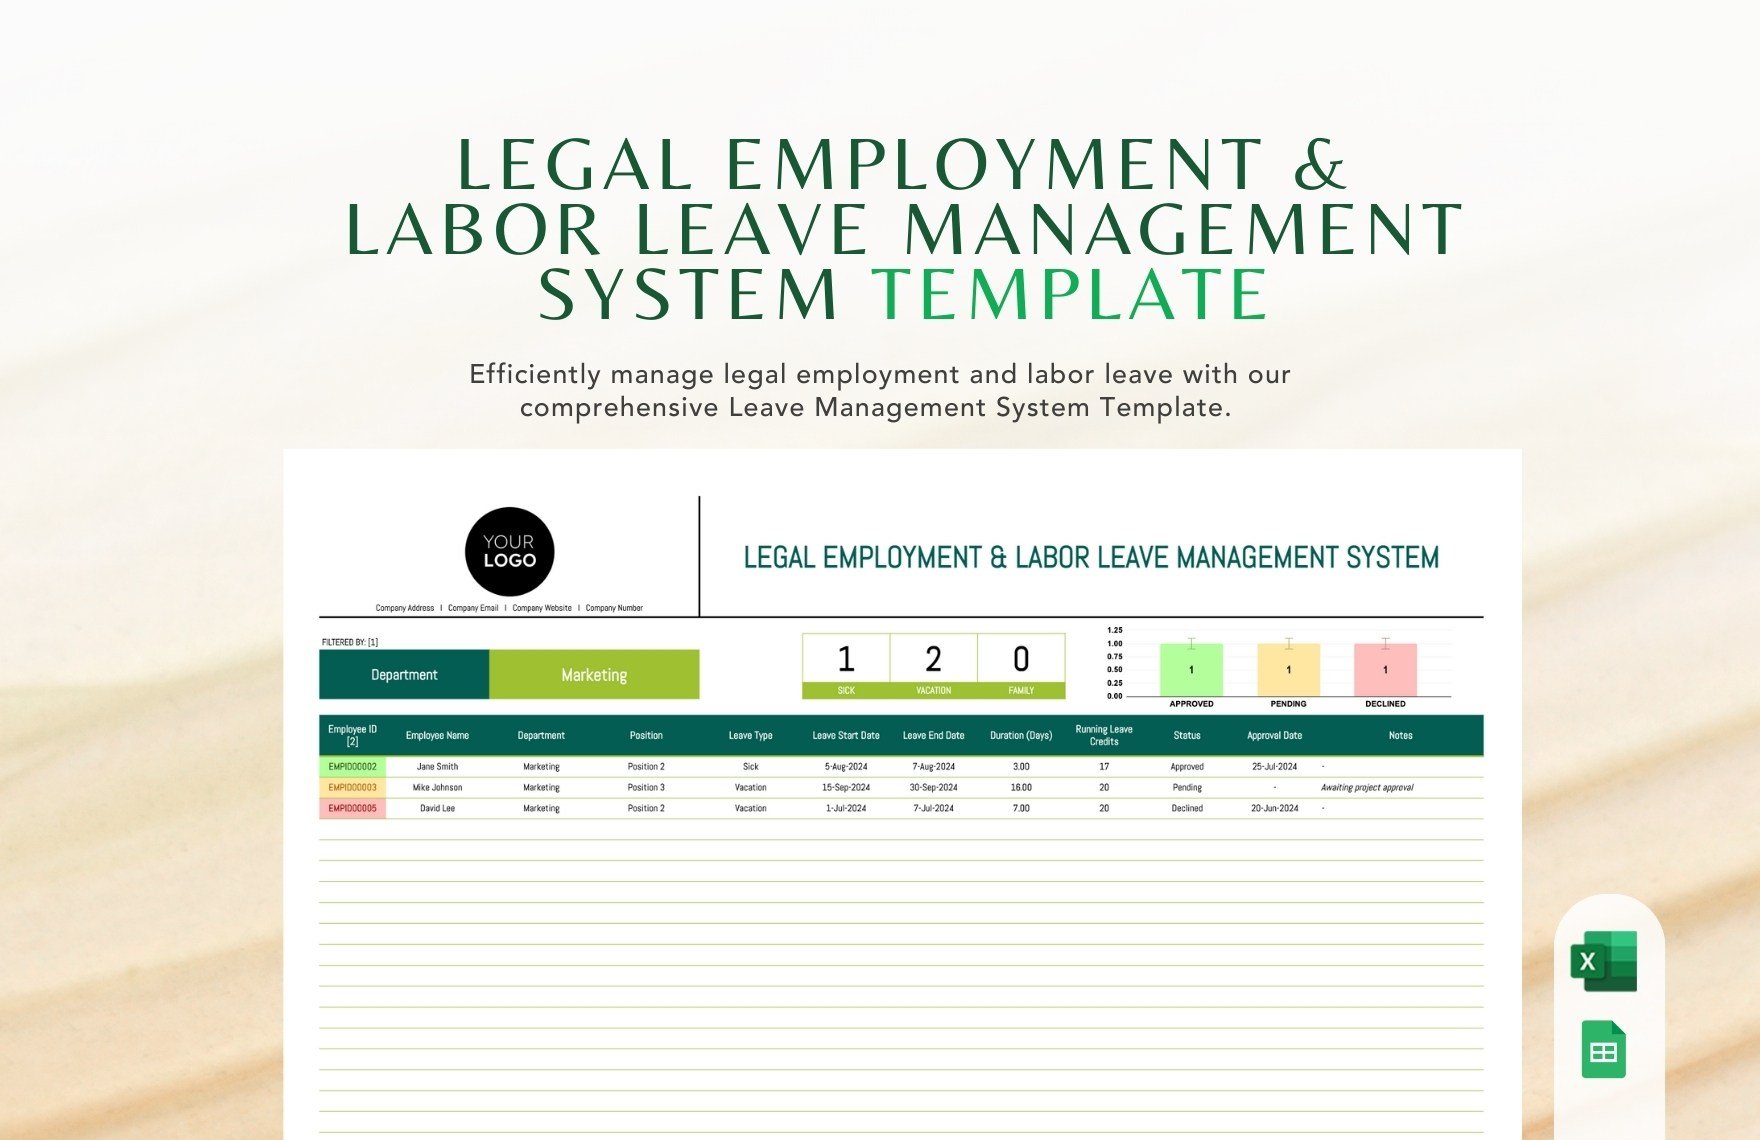 Legal Employment & Labor Leave Management System Template in Excel, Google Sheets